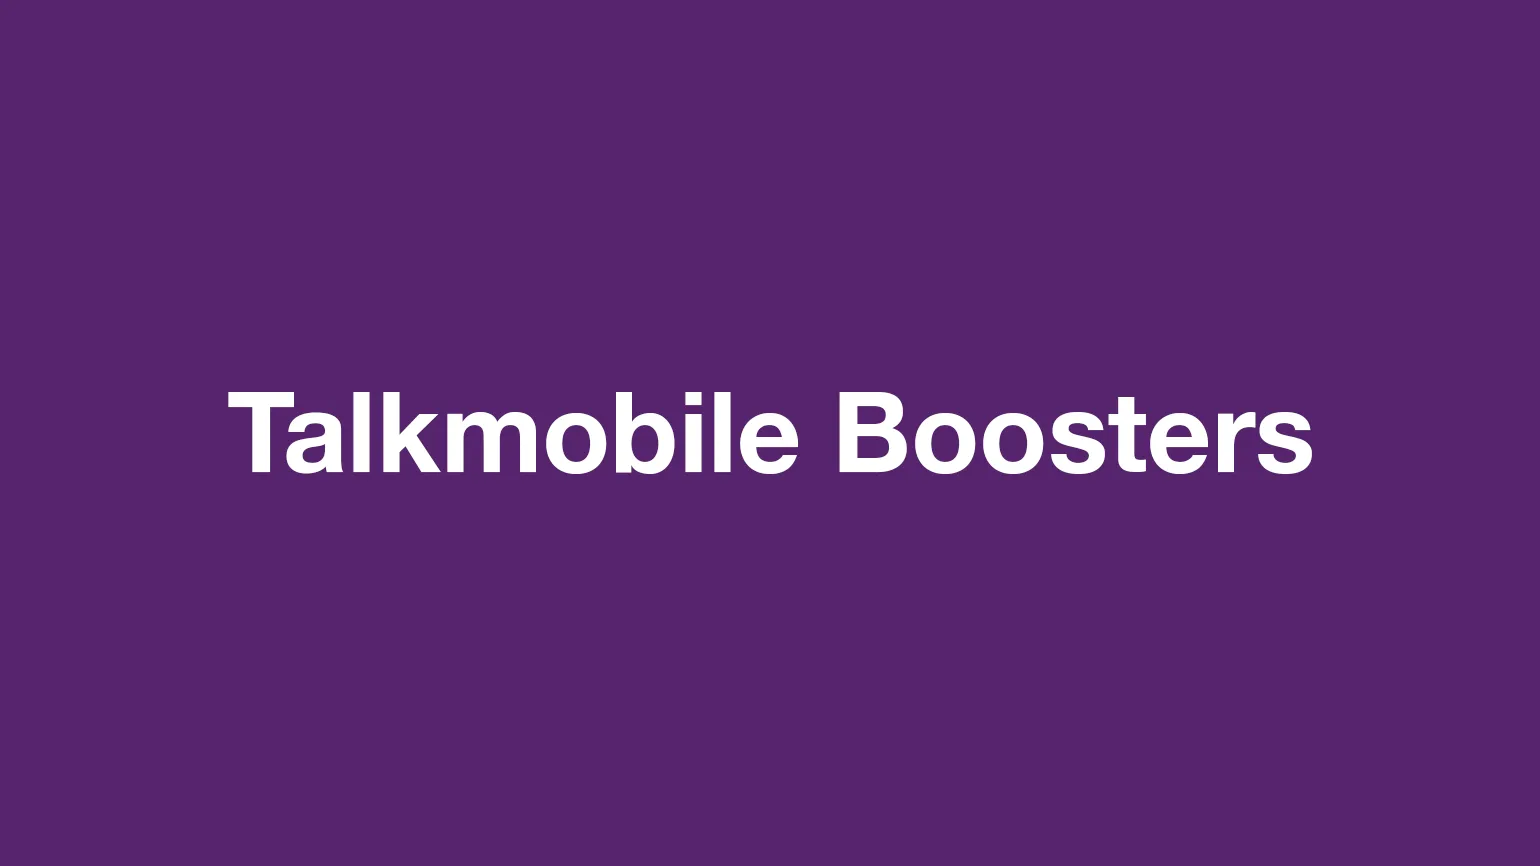 Talkmobile Boosters when roaming